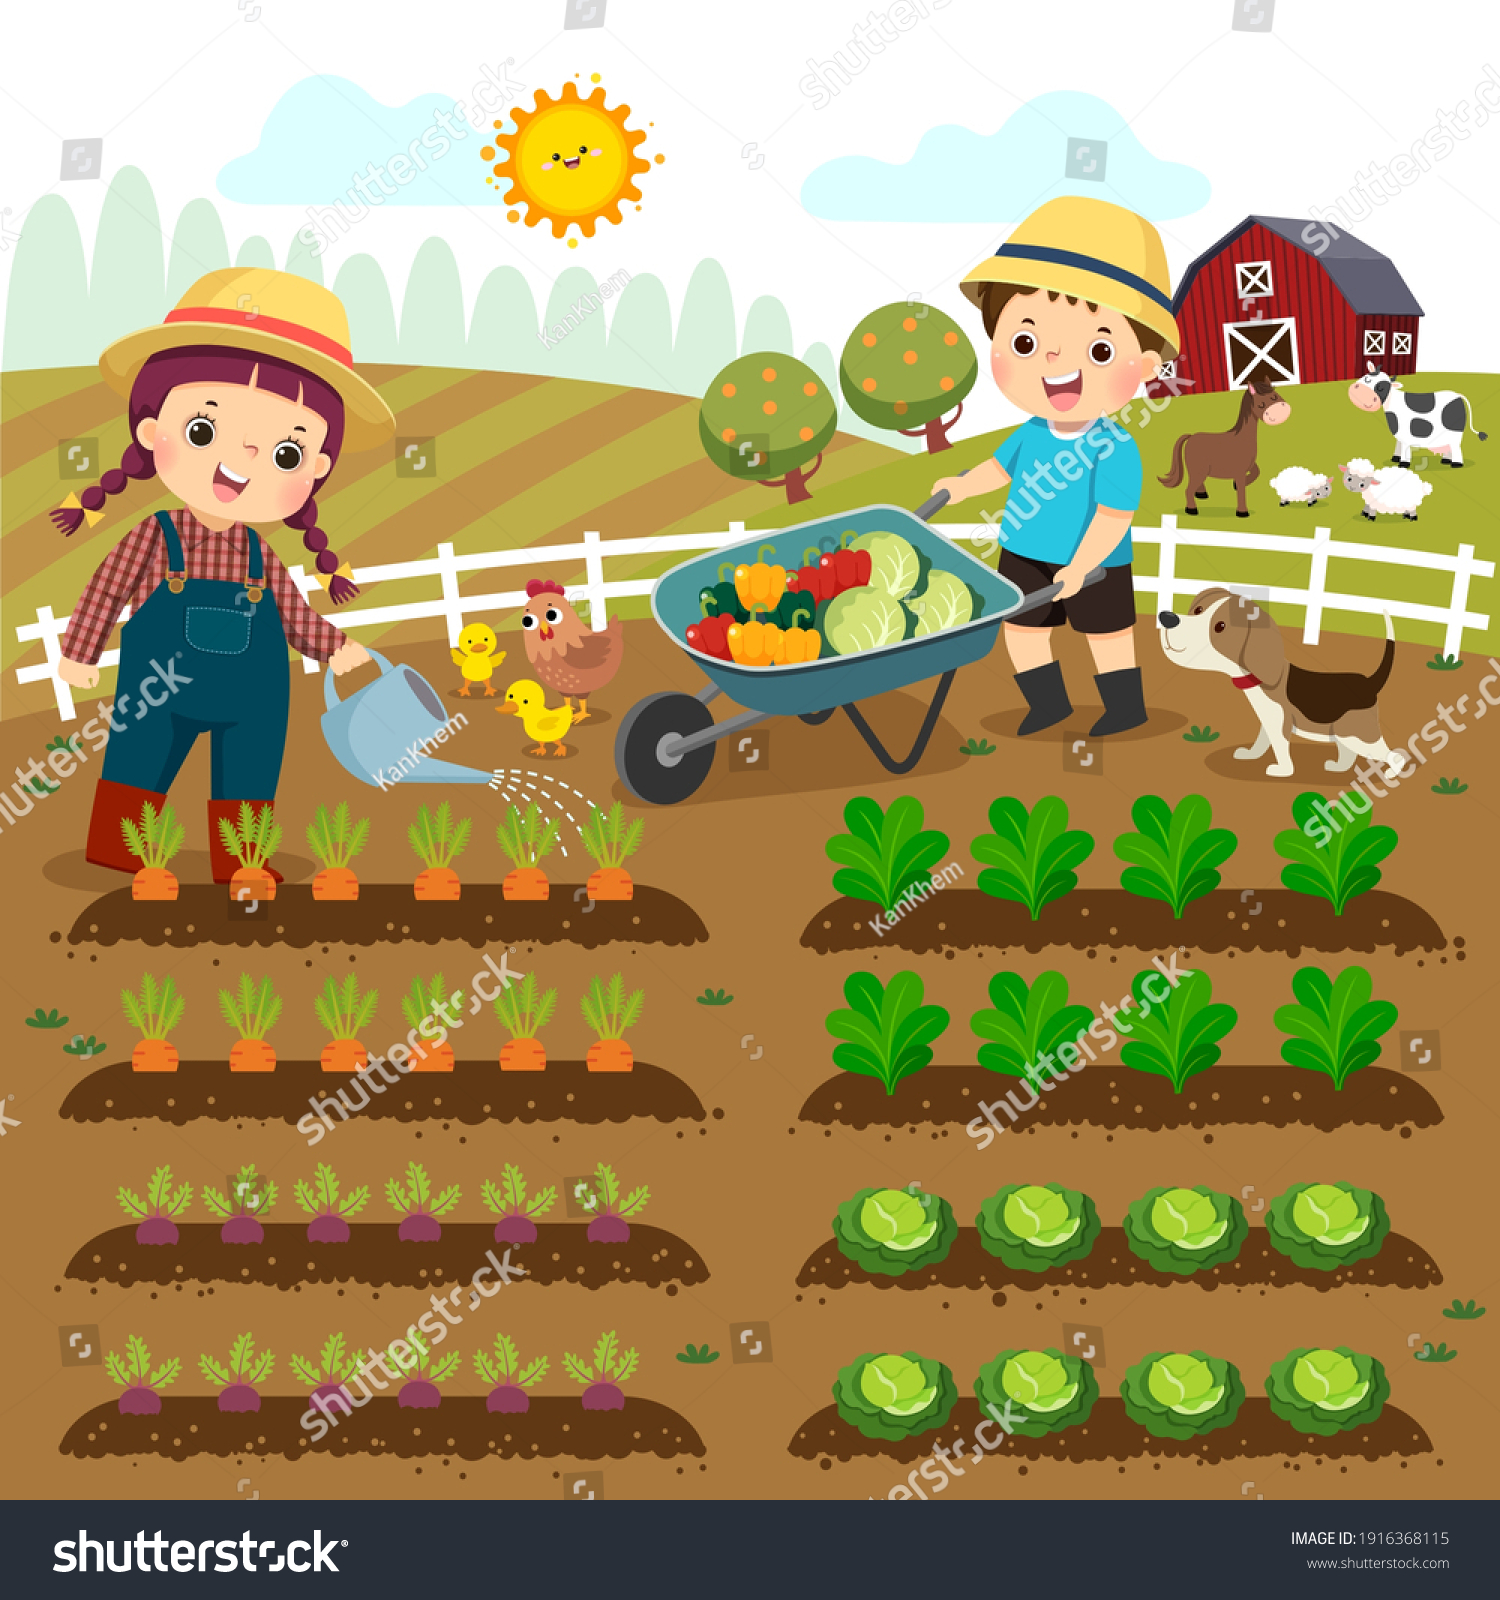 Vector illustration cartoon of girl watering vegetable plants and boy pushing the wheelbarrow of vegetables on the farm. #1916368115